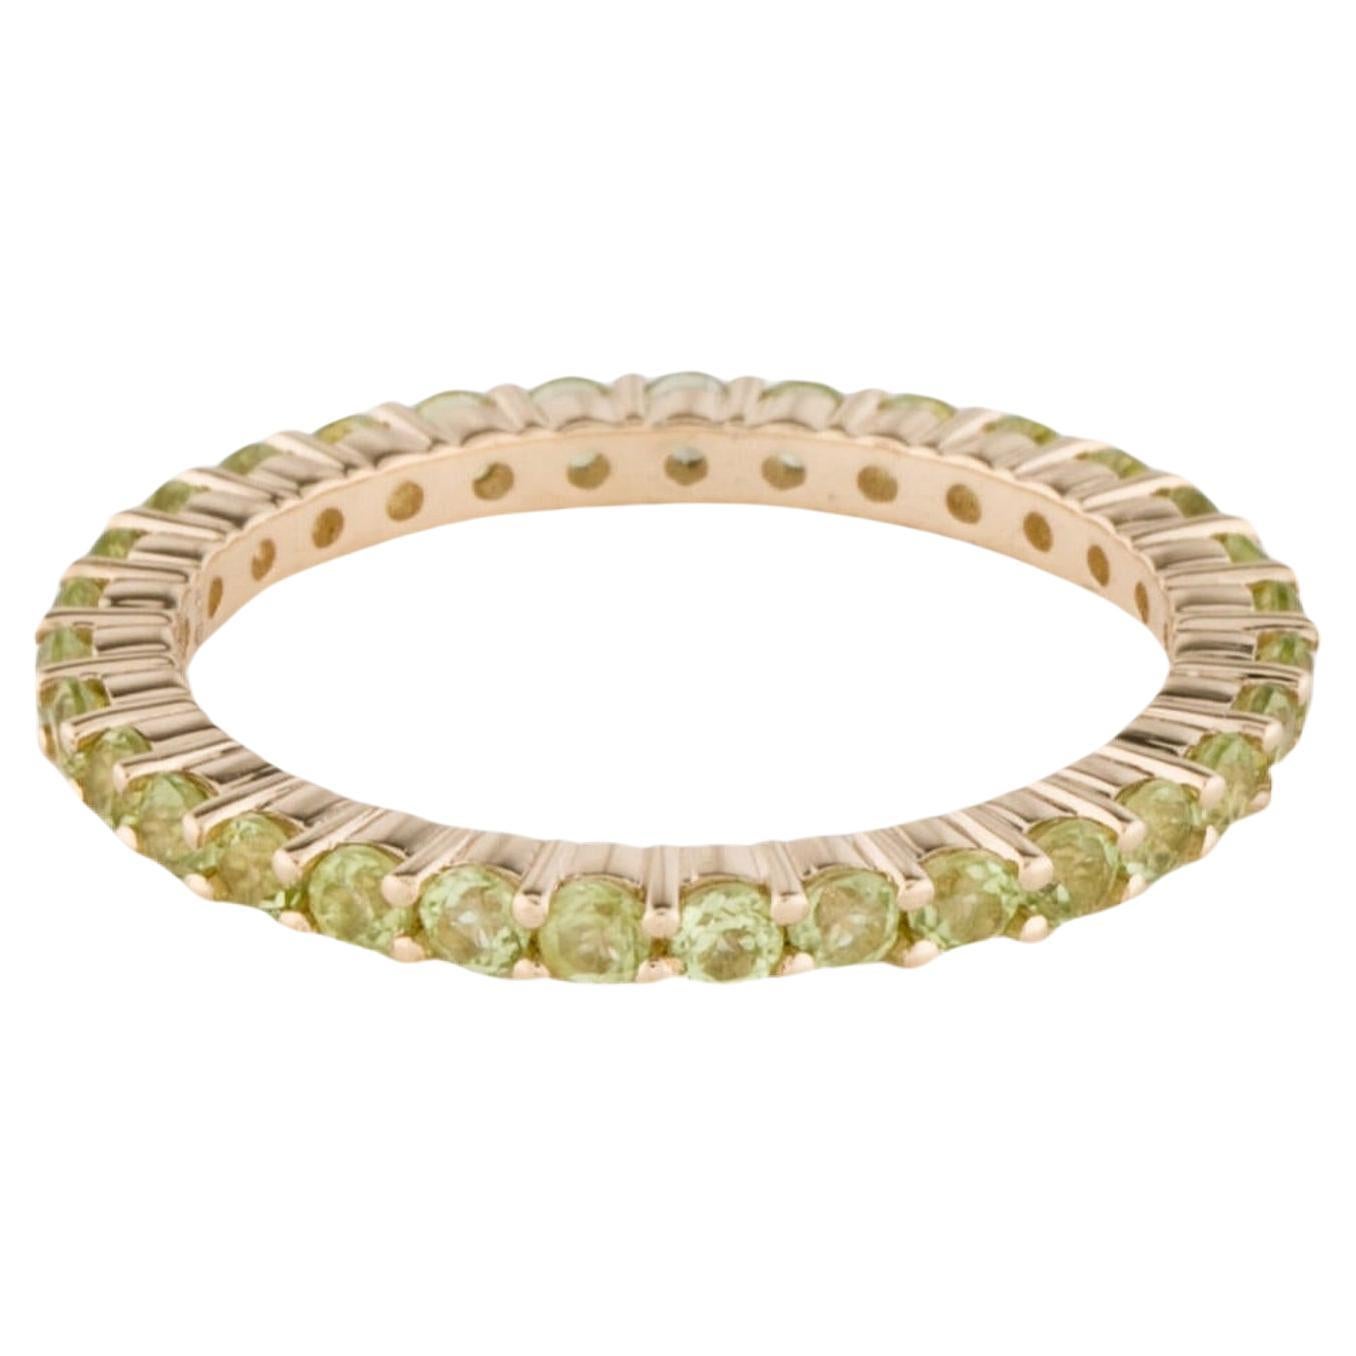 Chic 14K Peridot Eternity Band Ring, Size 7 - Timeless Statement Jewelry Pieces en vente